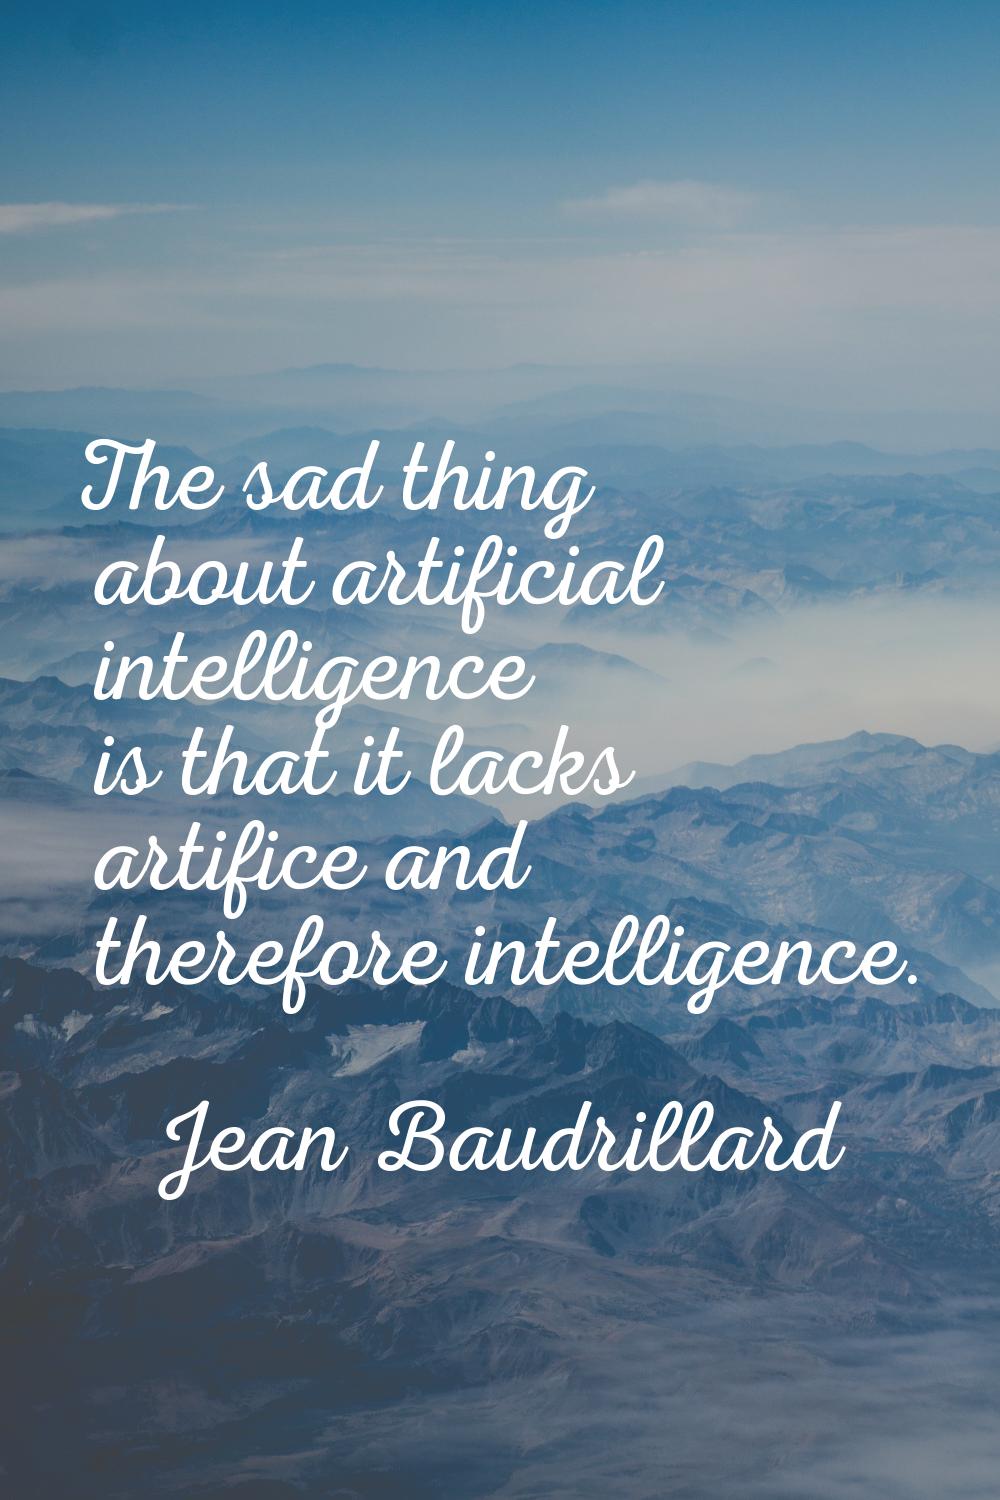 The sad thing about artificial intelligence is that it lacks artifice and therefore intelligence.